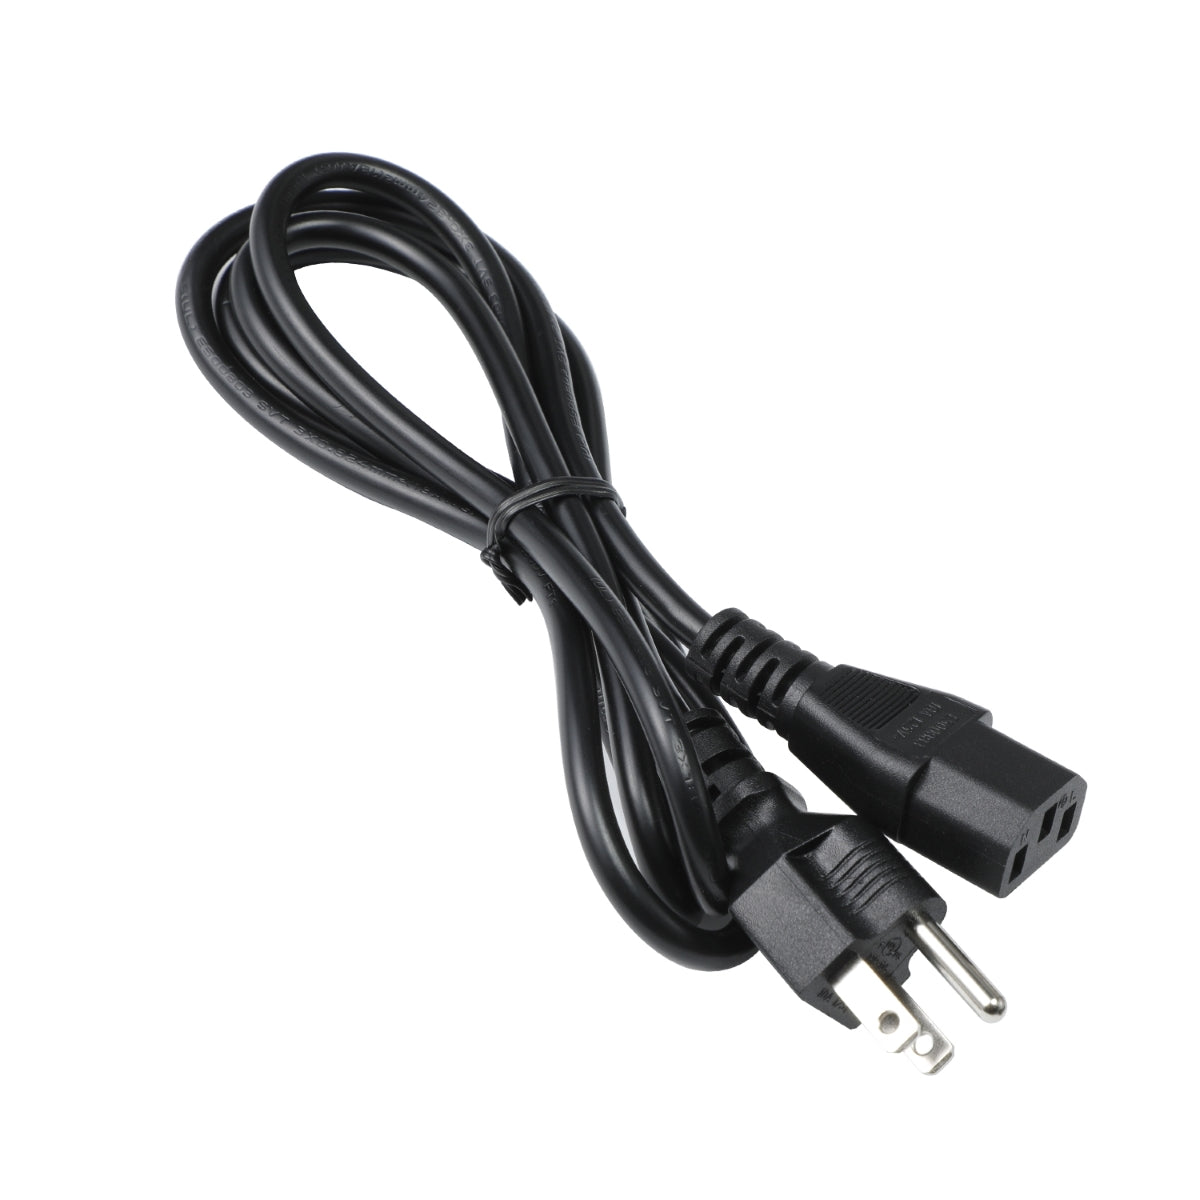 Power Cord for HP W2207/W2207h 22-inch Monitor